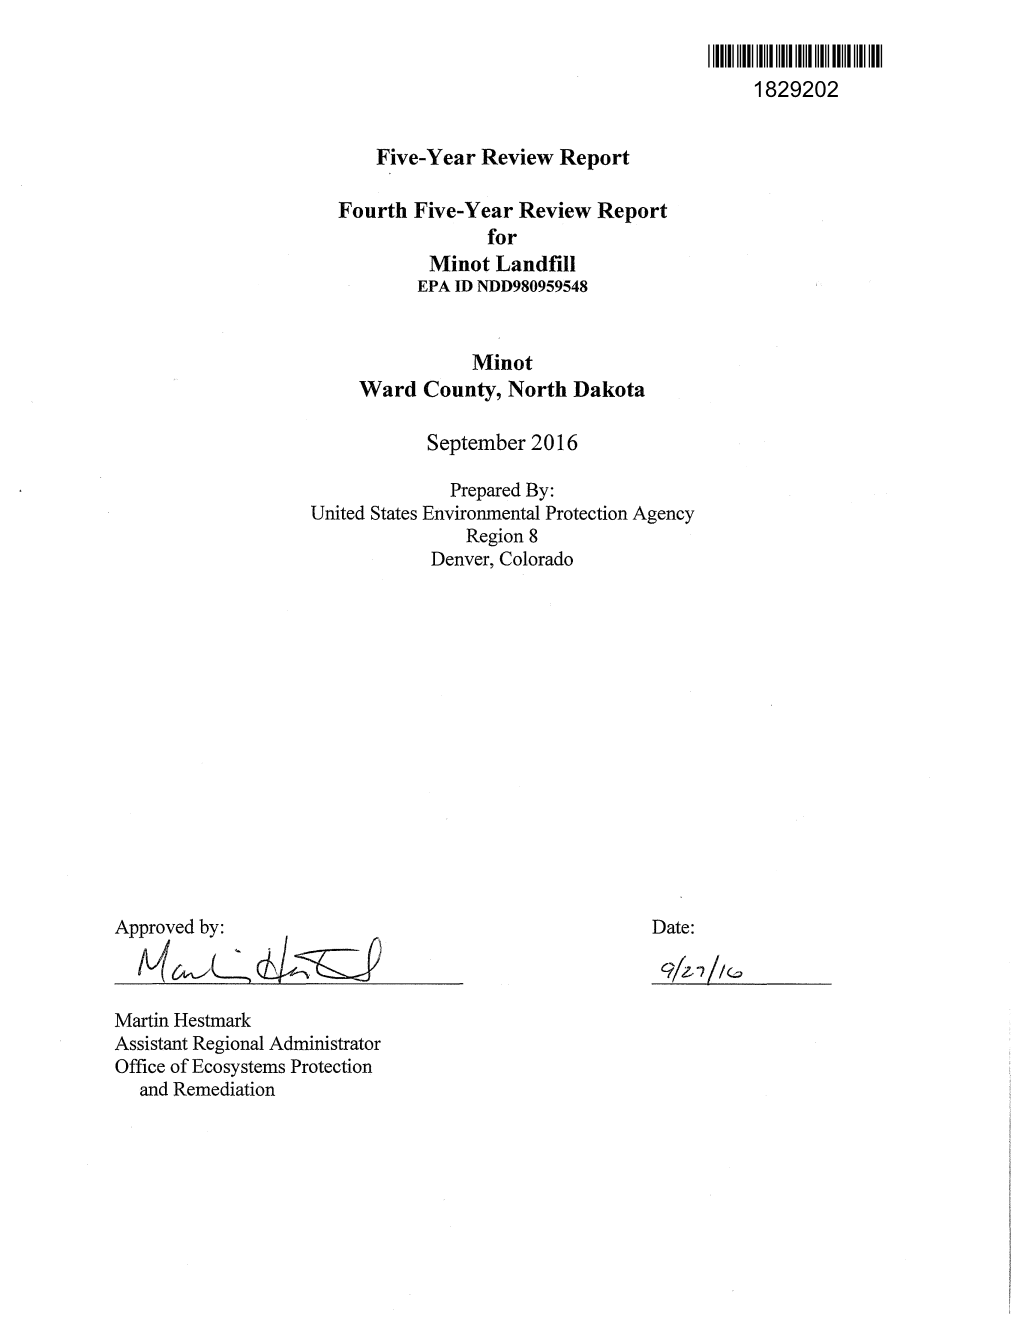 Fourth Five-Year Review Report for Minot Landfill Minot Ward County